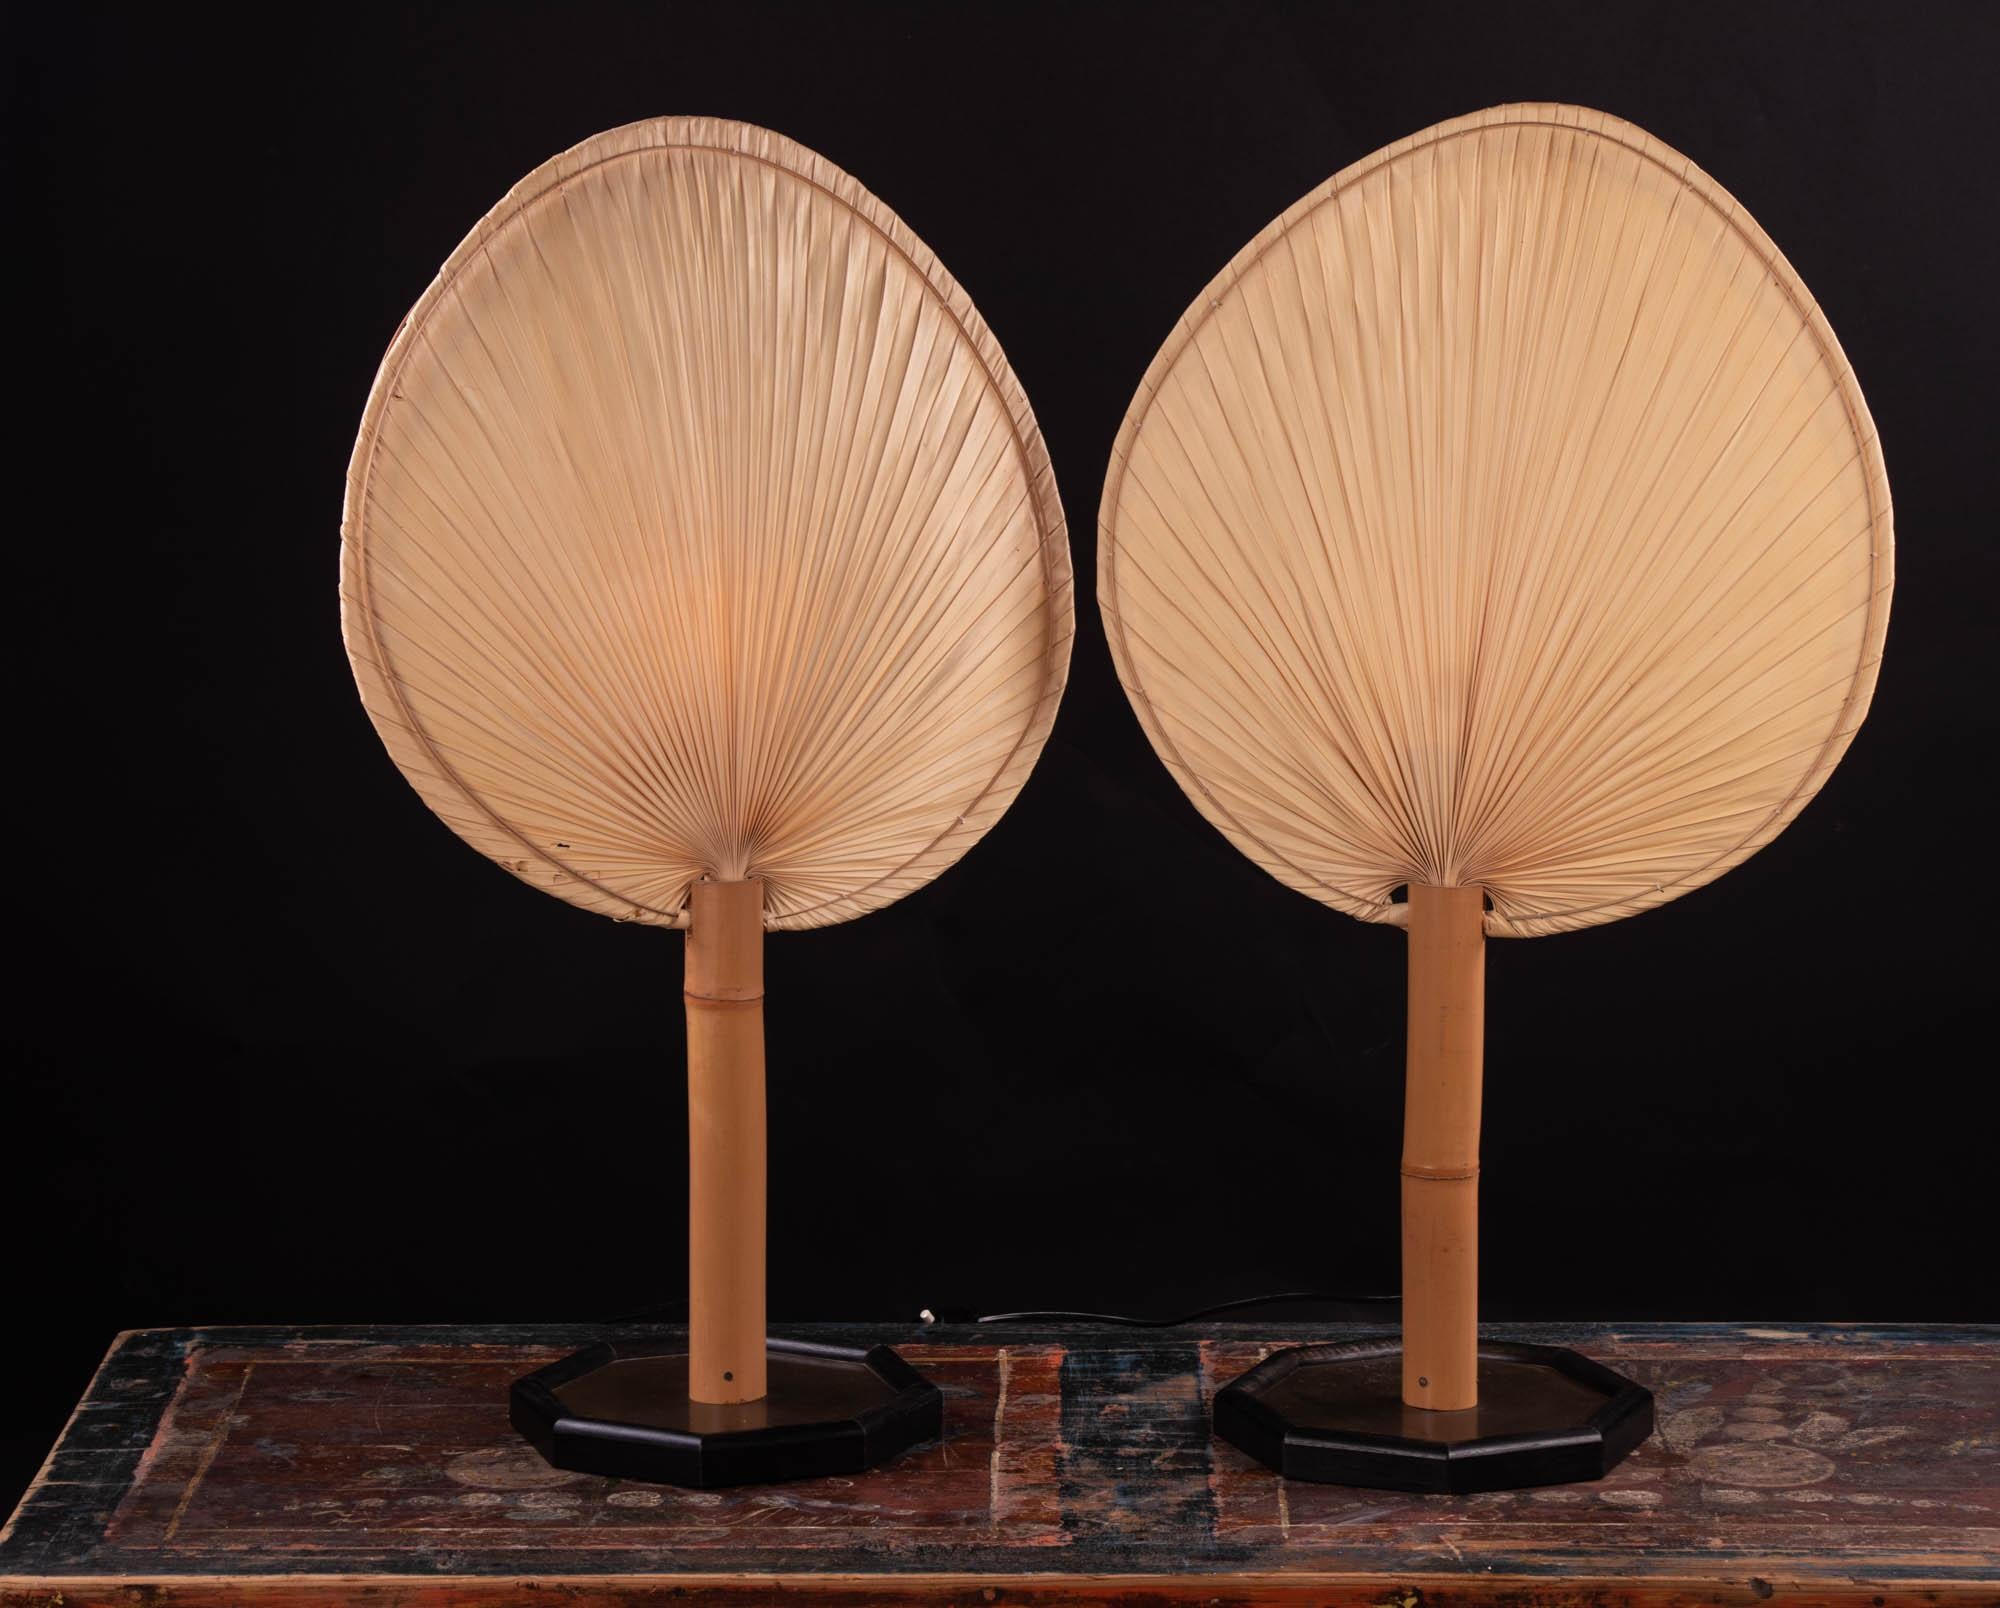 Pair of fan table lights by Ingo Maurer Design M, Germany, 1970s from the Uchiwa series. 
Fan made of bamboo and Japanese rice paper, the Stand is made of metal and wood. One E14 Edison base bulb. 

The lamp has been tested with US American light